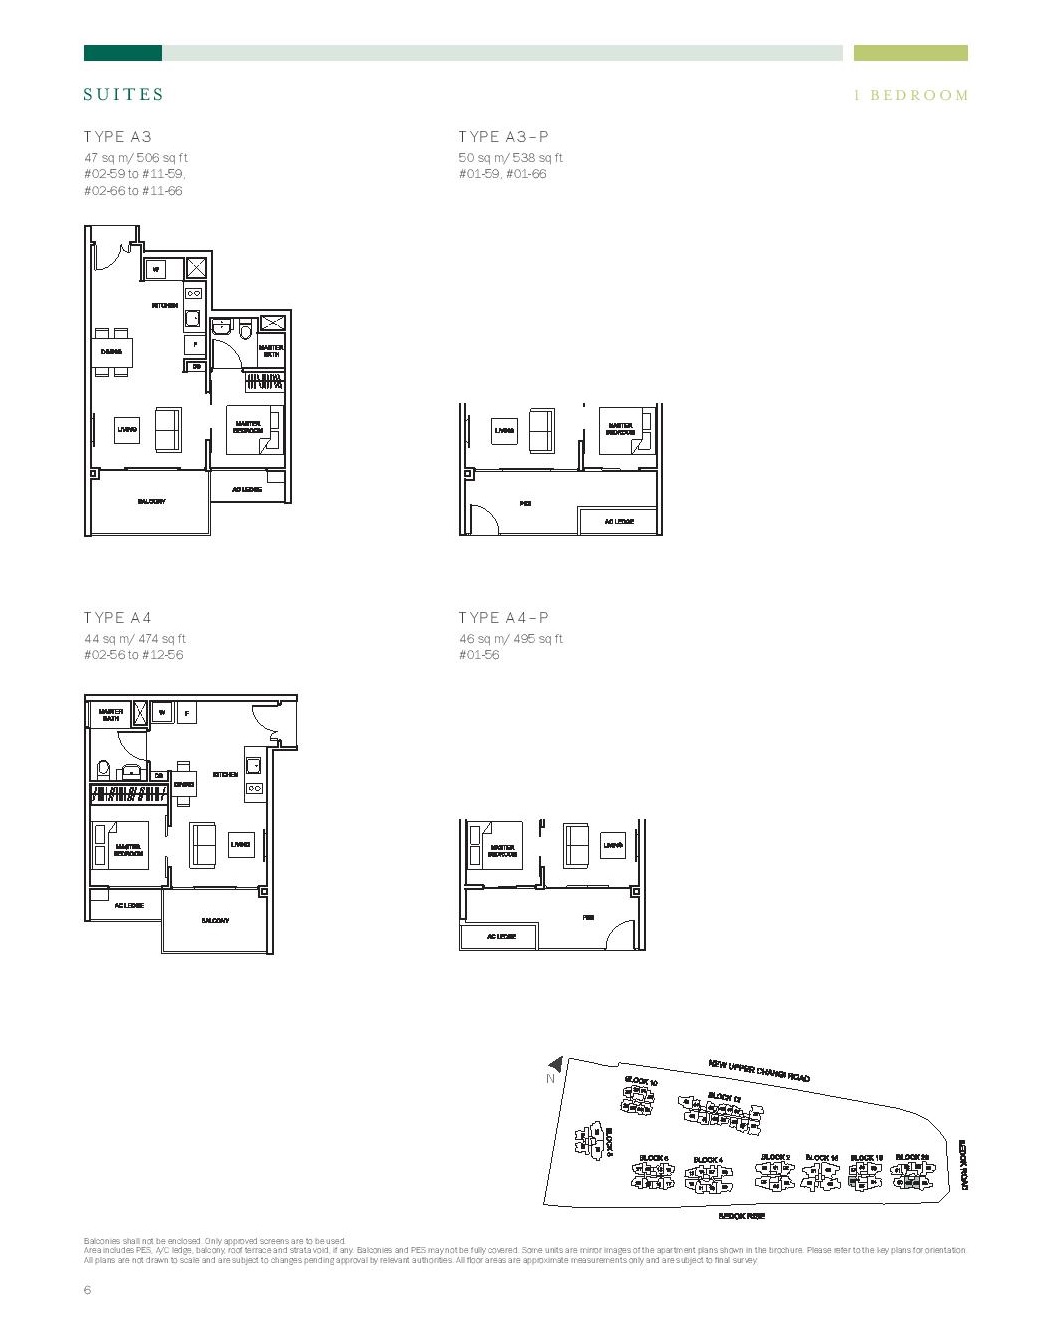 The Glades @ Tanah Merah 1 Bedroom Floor Type A3, A4, A3-P, A4-P Plans